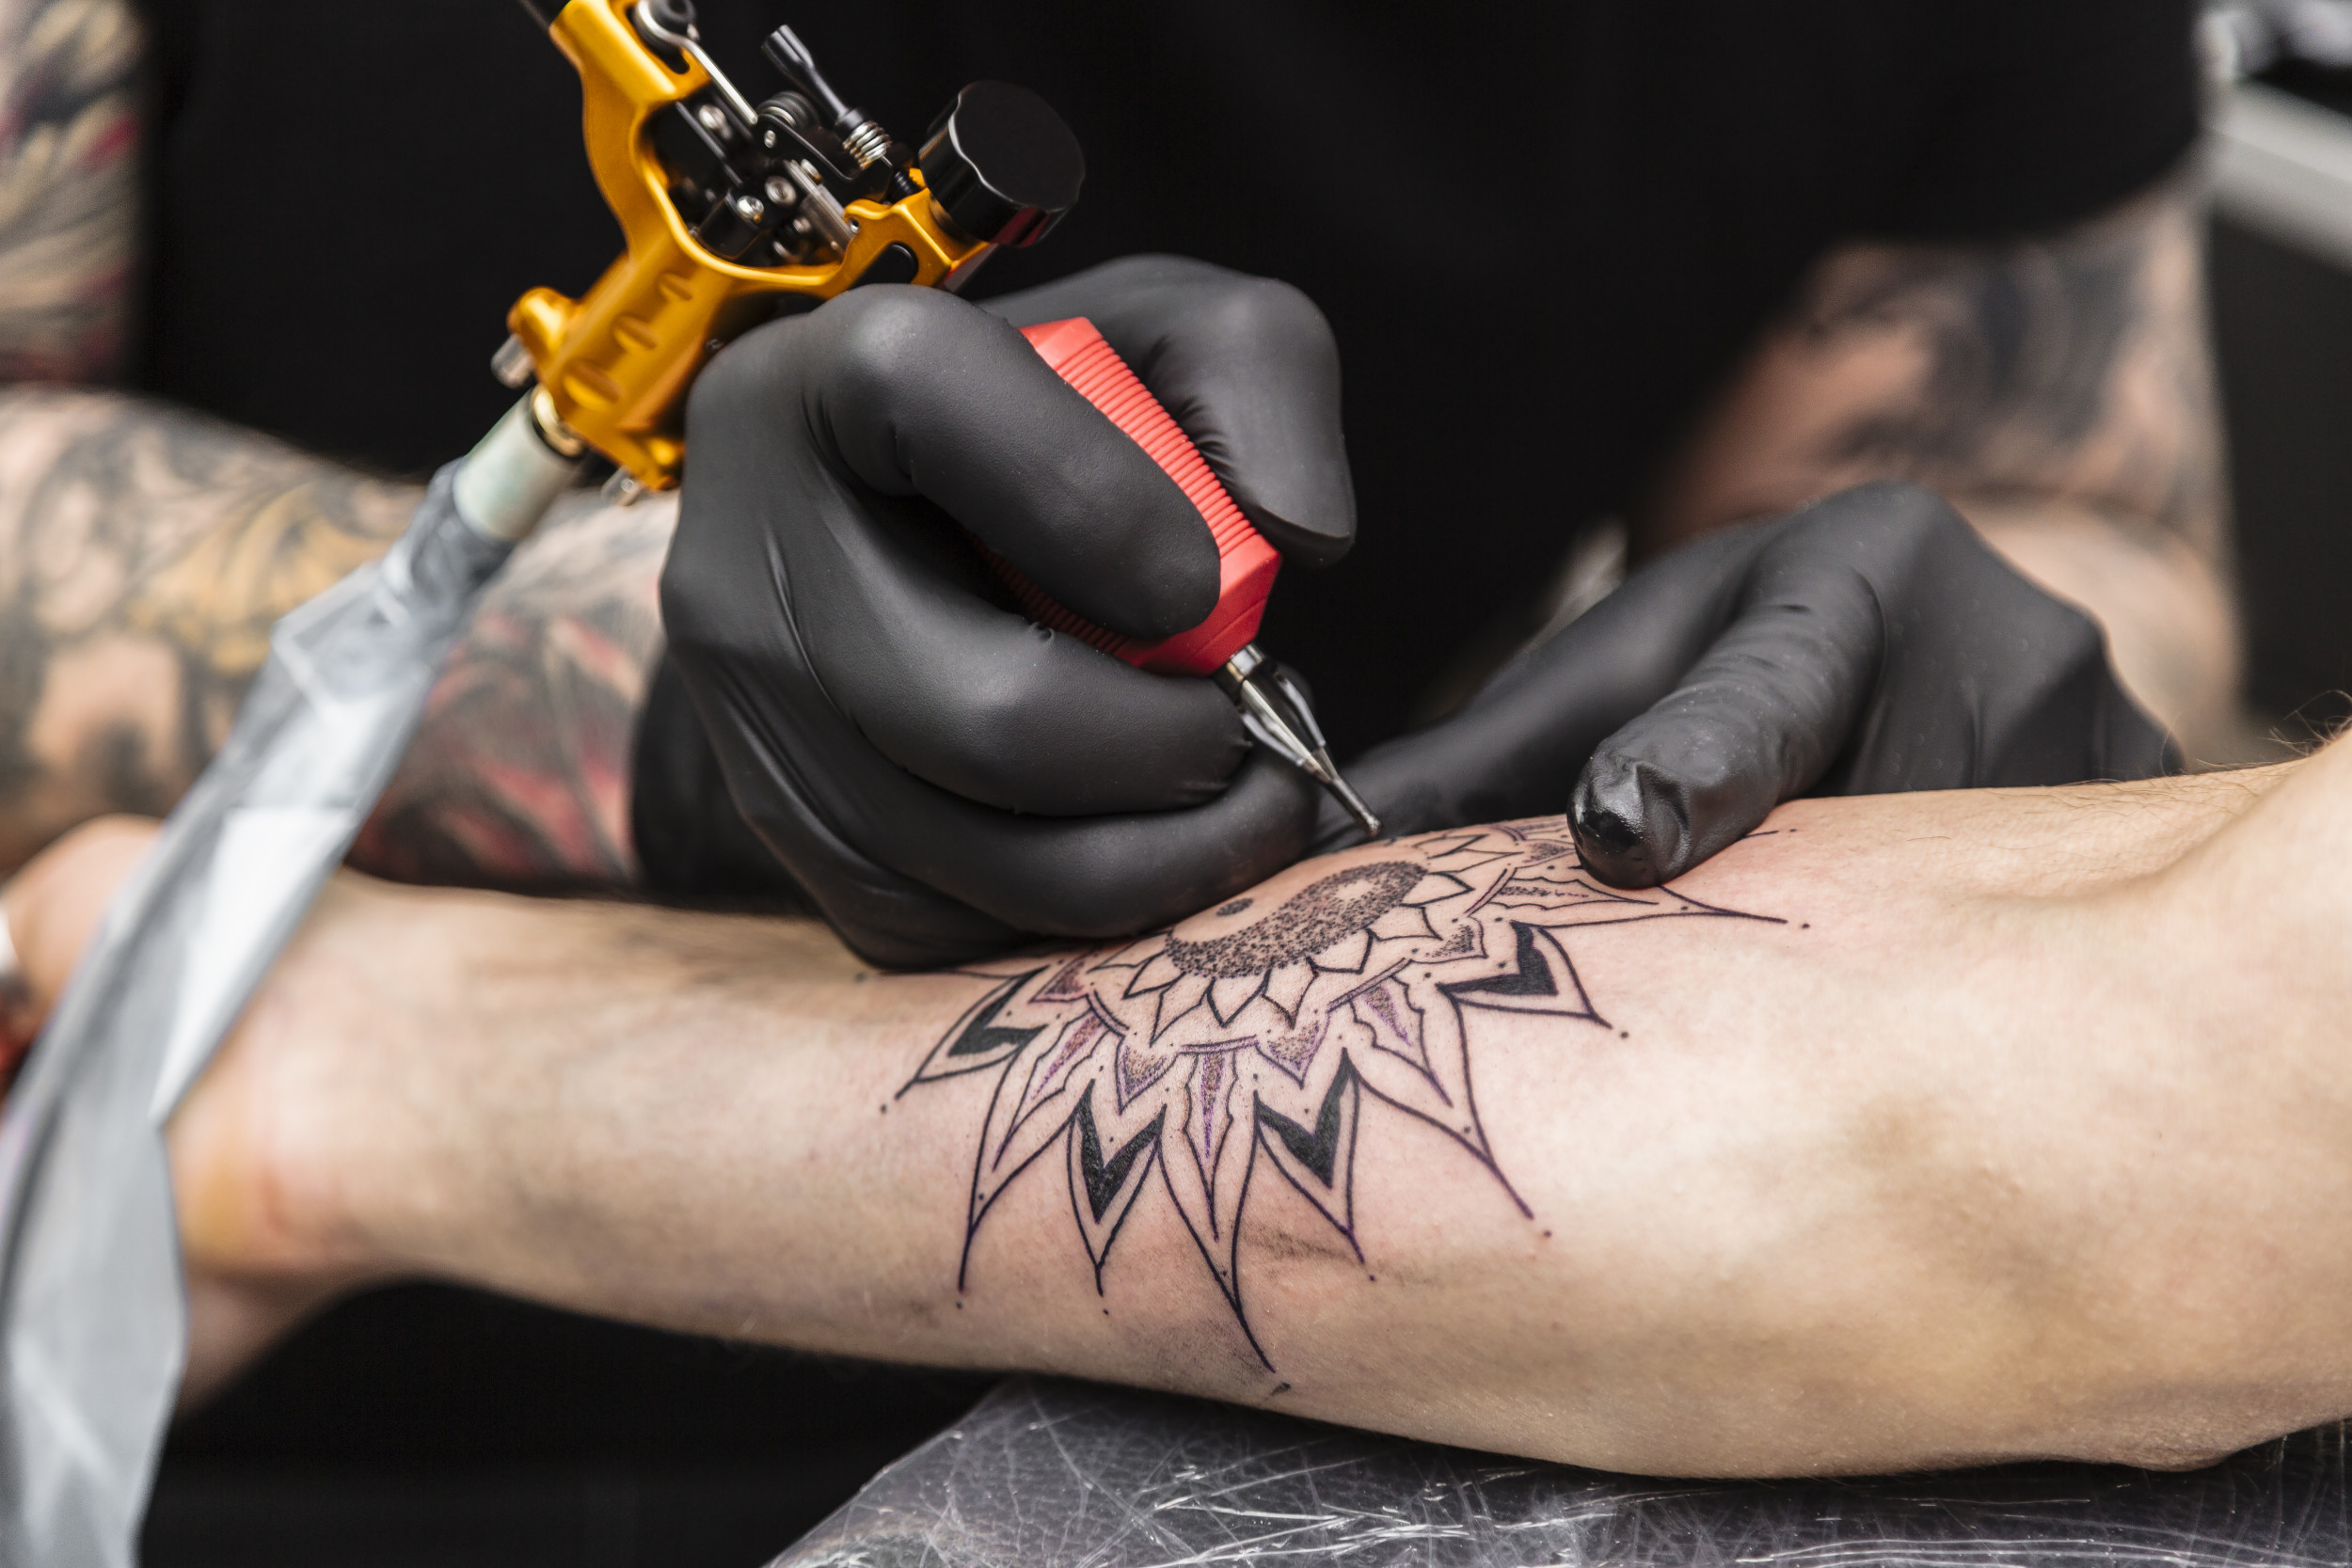 Explore hypoallergenic tattoo ink that's safe for allergies